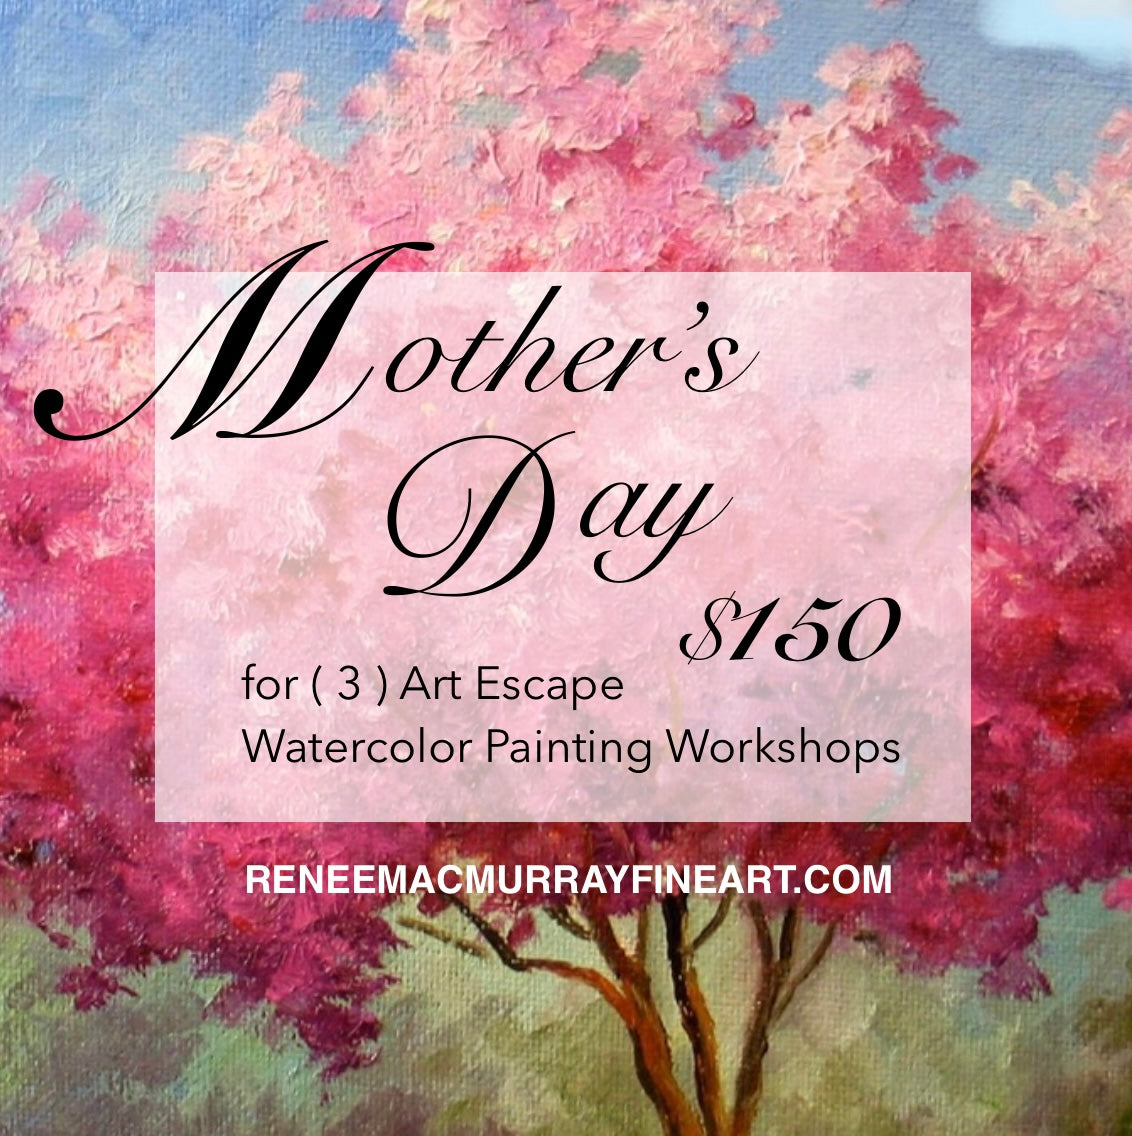 Mother’s Day “Art Escape” Special